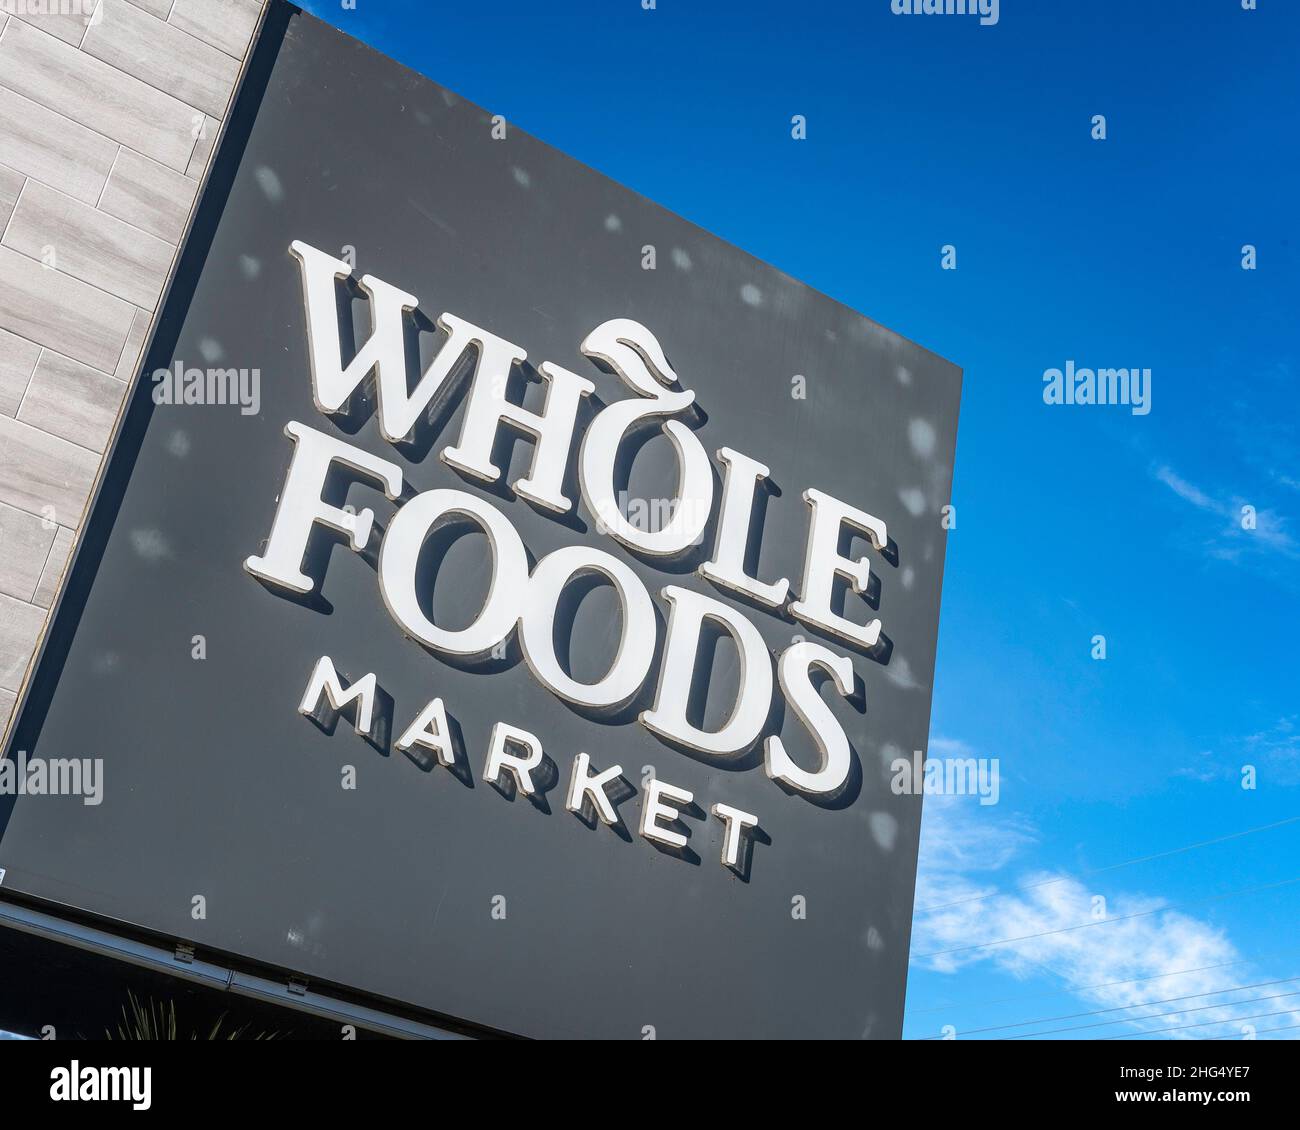 Burbank, CA, USA - January 16, 2022: Close-up of a Whole Foods Market sign in Burbank, CA. Stock Photo